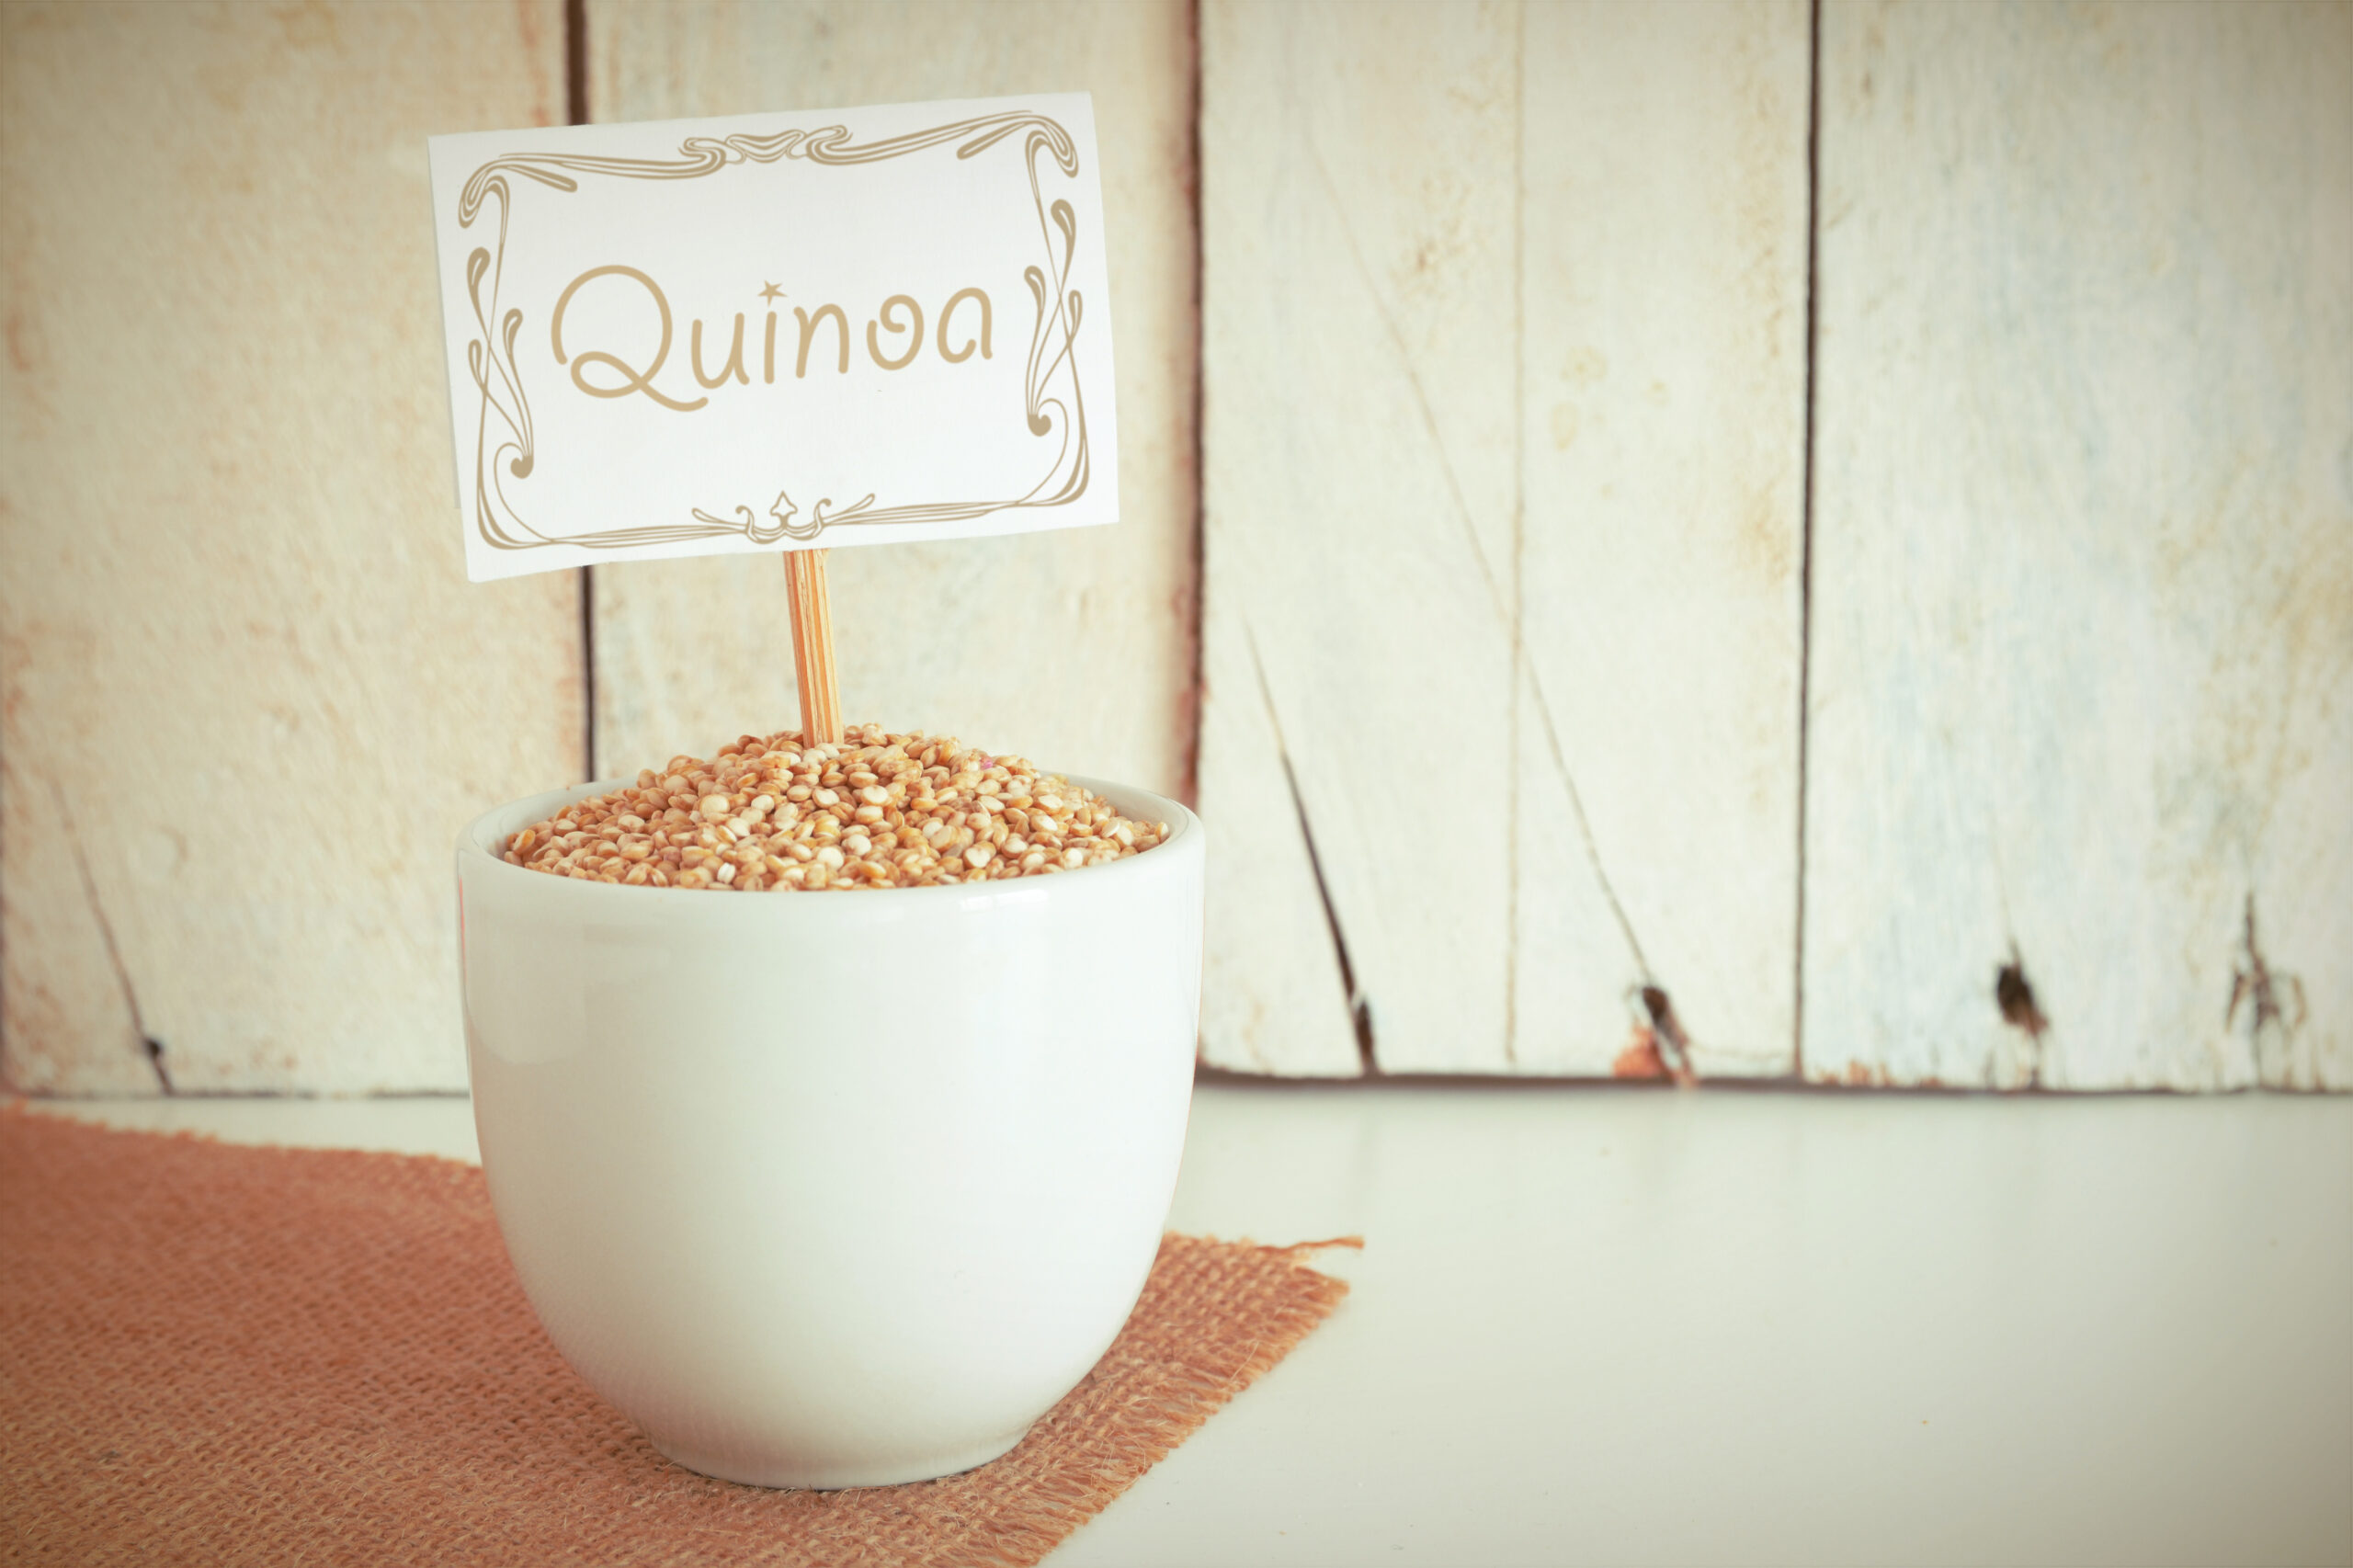 Quinoa improves intestinal flora and protects against diseases